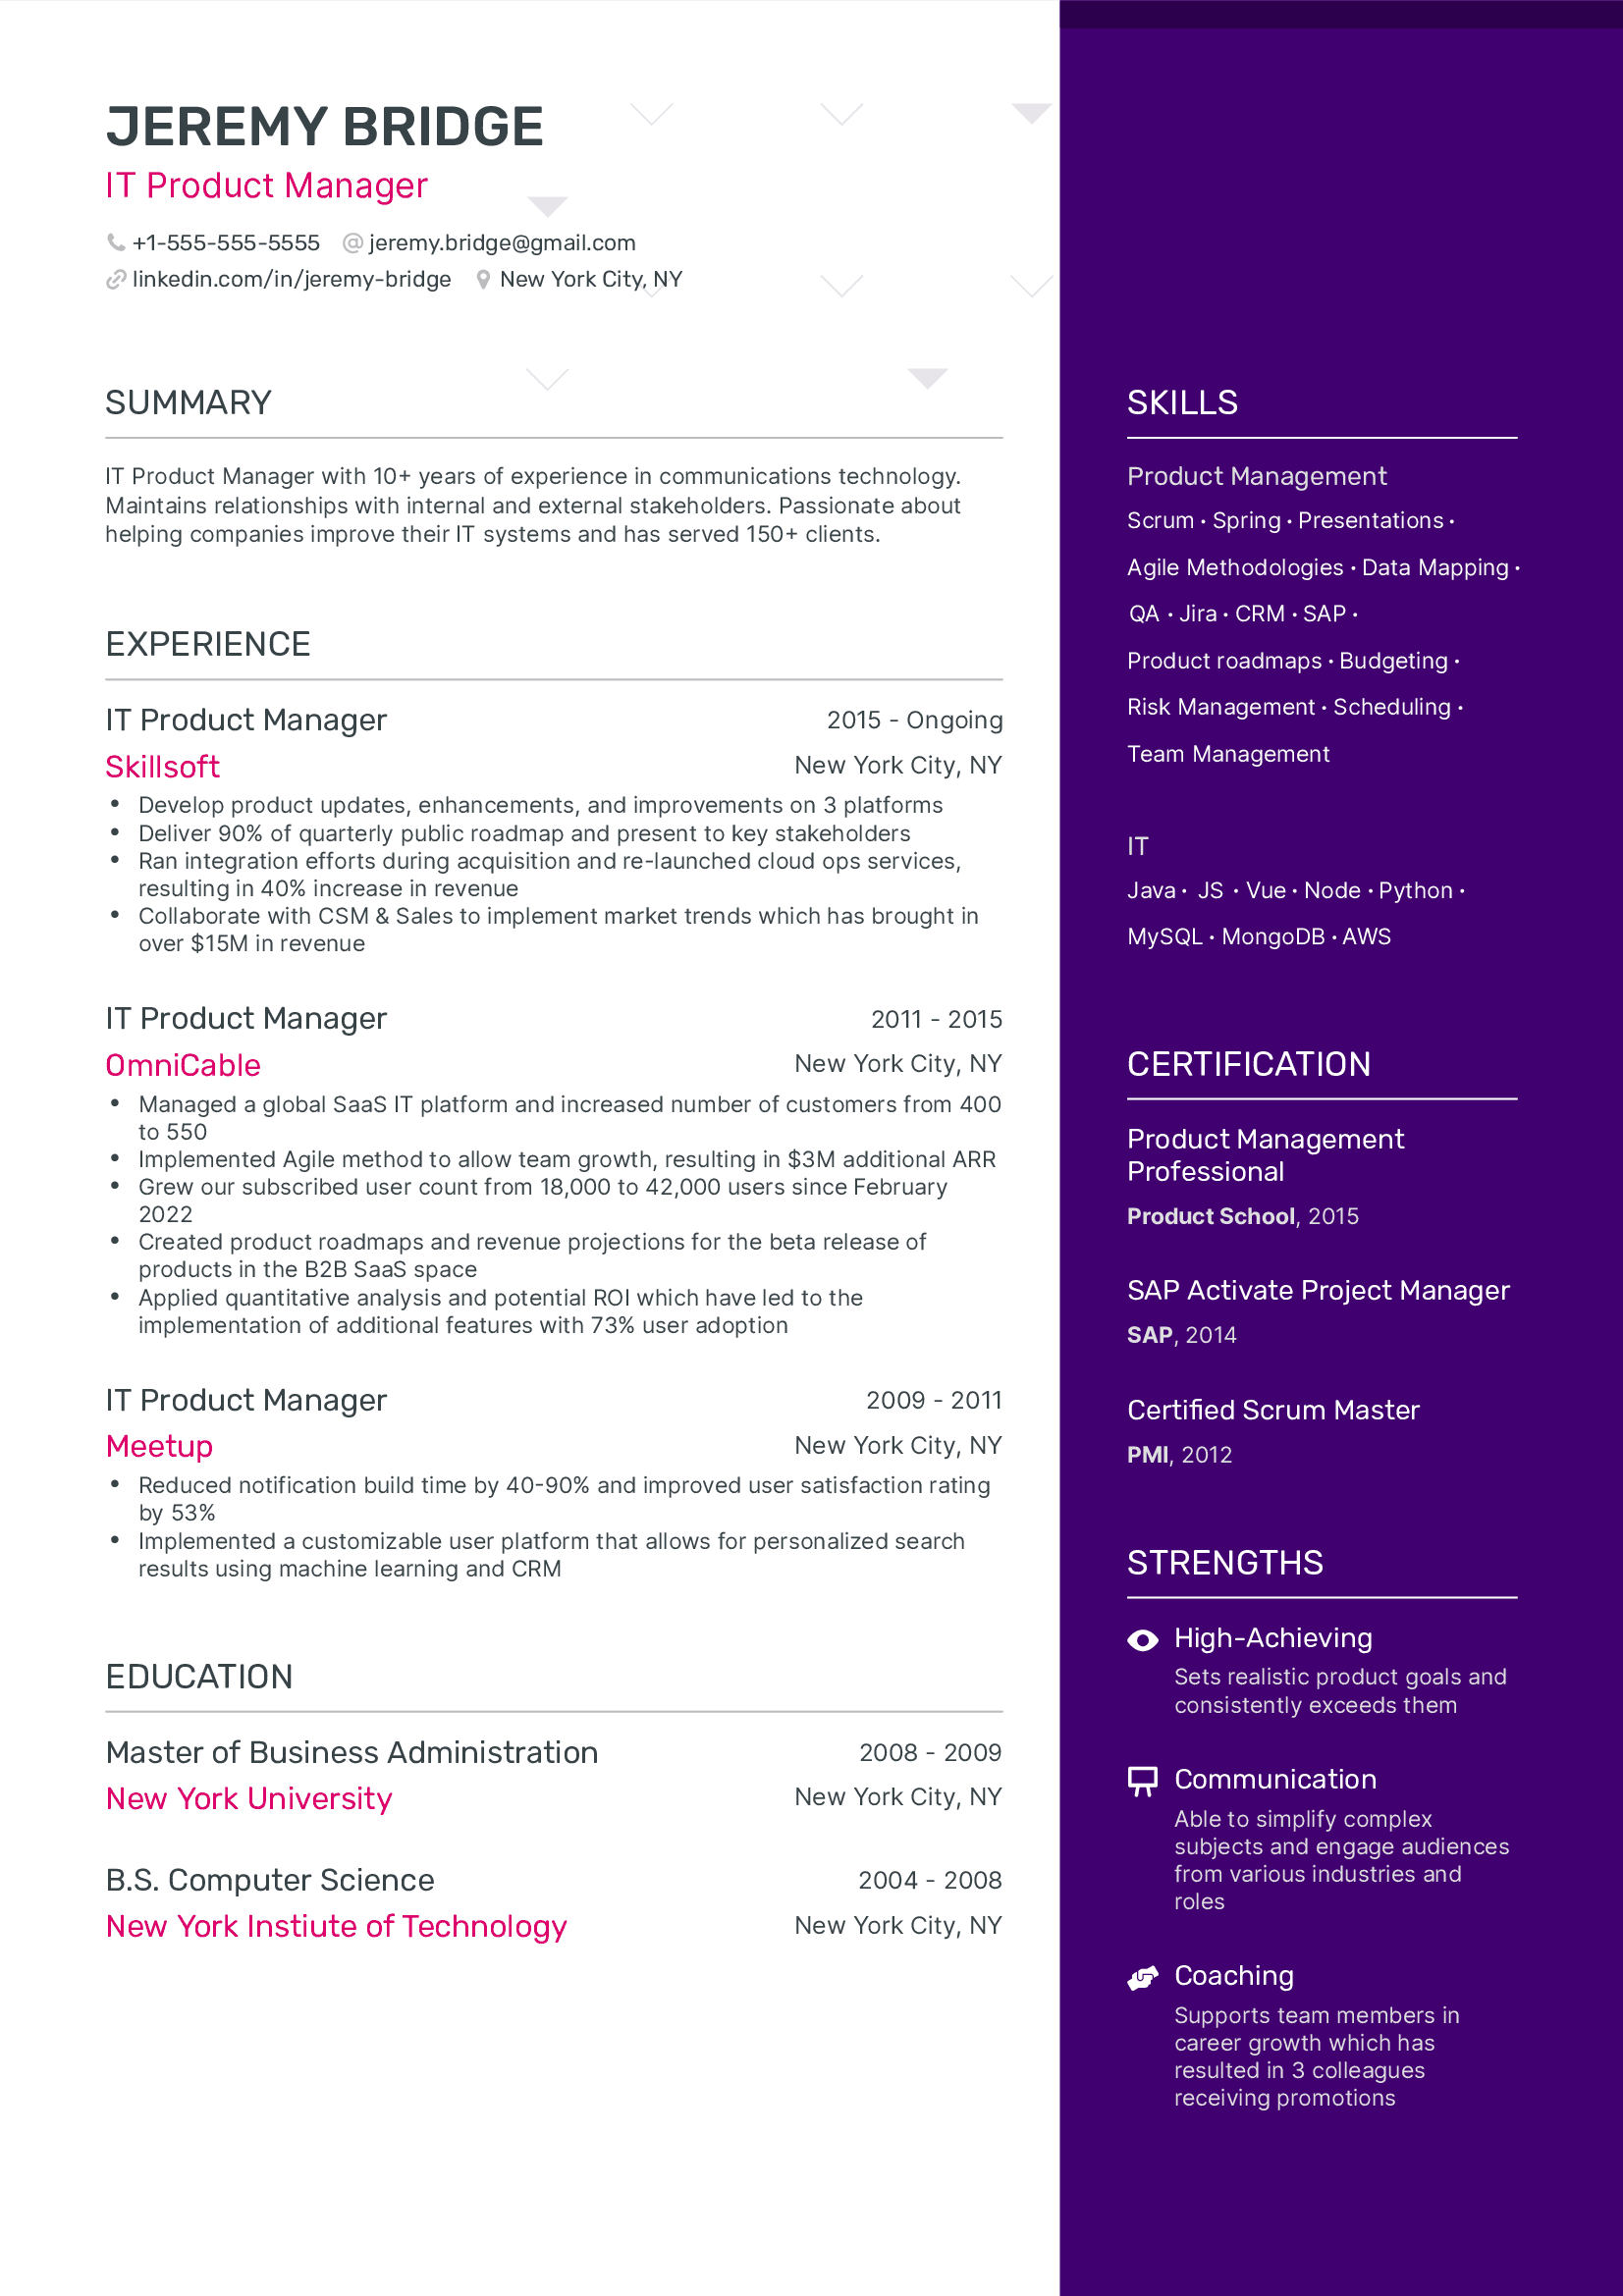 IT Product Manager Resume.png